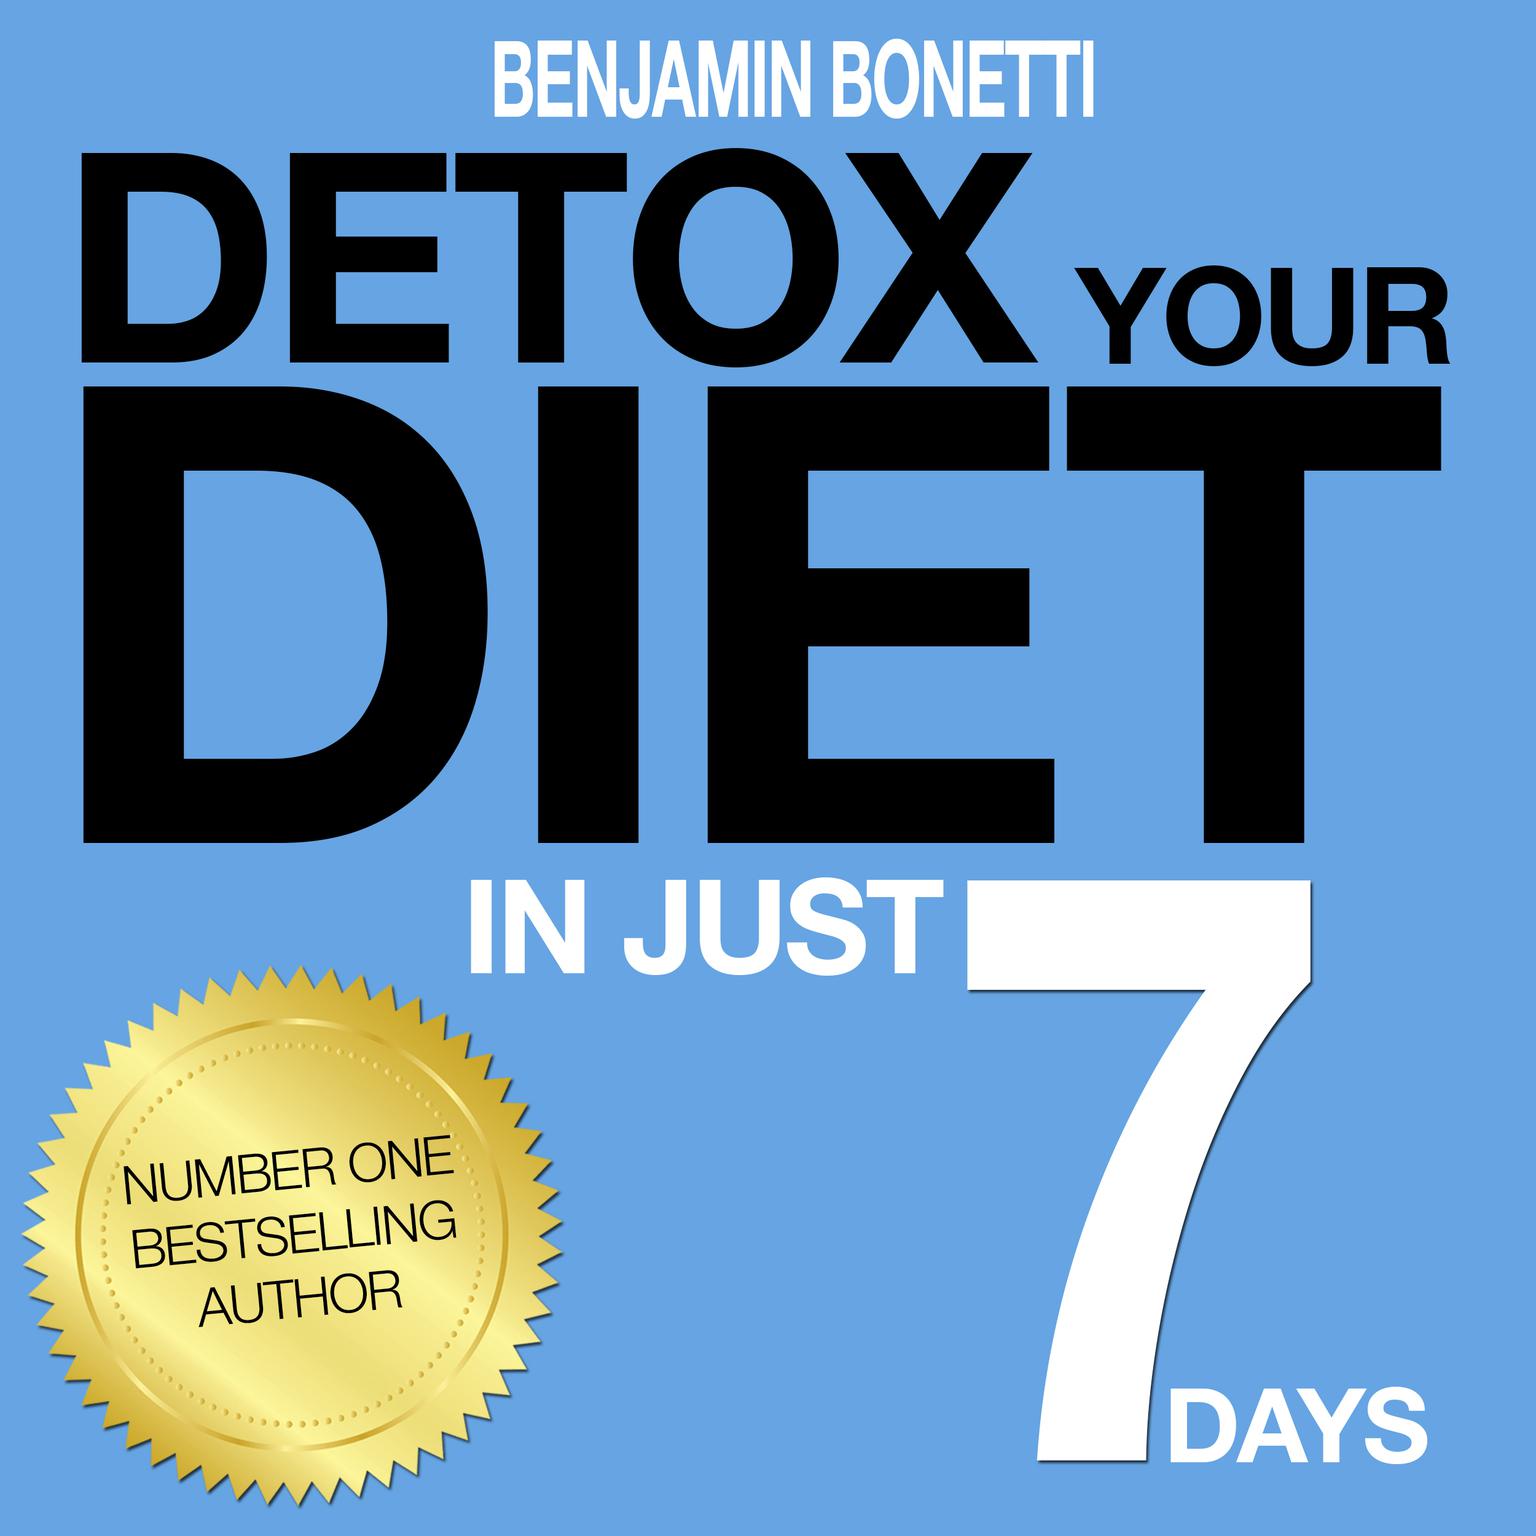 Detox Your Diet in Just 7 Days: The Perfect Combination of Effective Lifestyle Change (Abridged): 7 Days to Re-Educate, Reactivate, and Realize a Better You Audiobook, by Benjamin  Bonetti